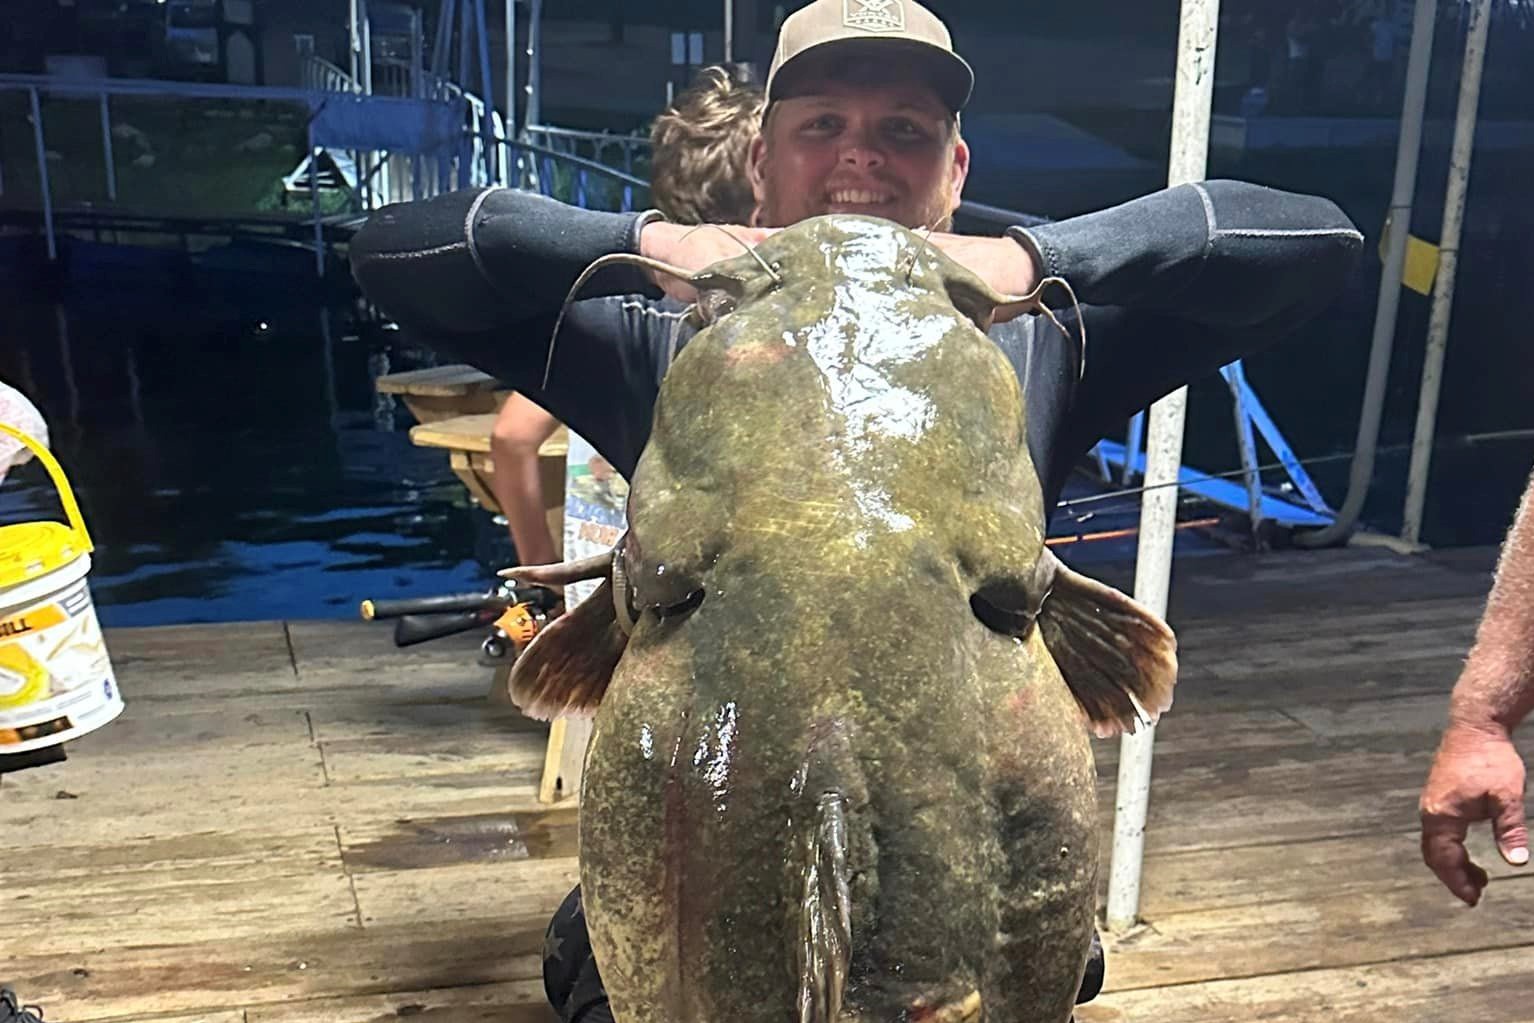 Two anglers may have noodled a record catfish in Texas lake